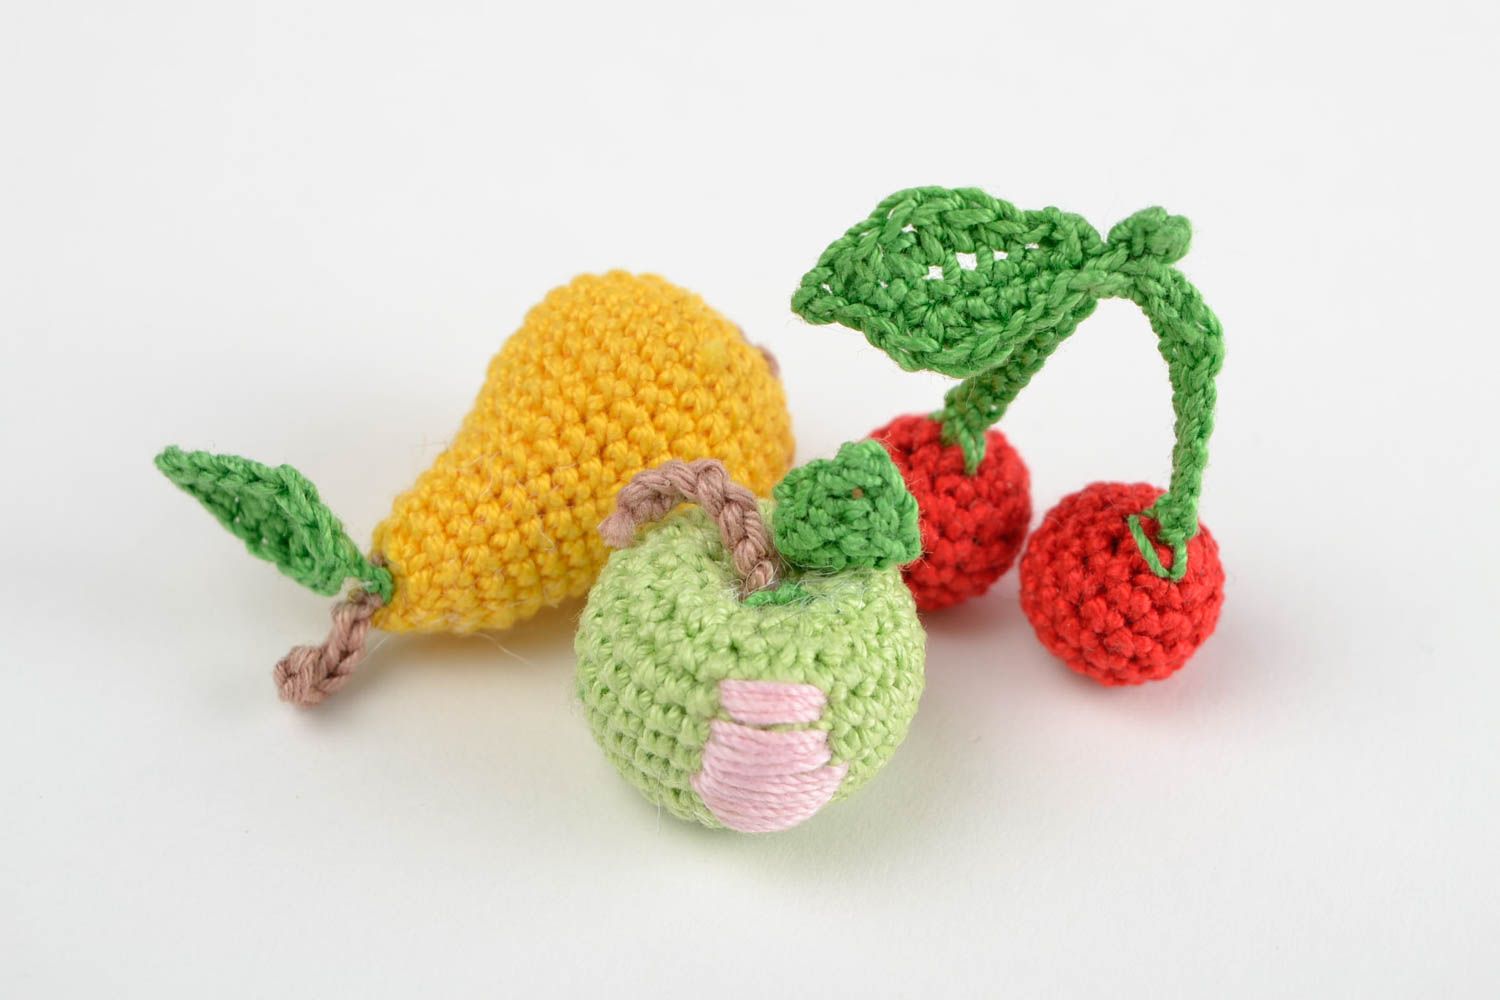 Handmade toy unusual toy for kids designer soft toy crocheted toy set of 4 items photo 4